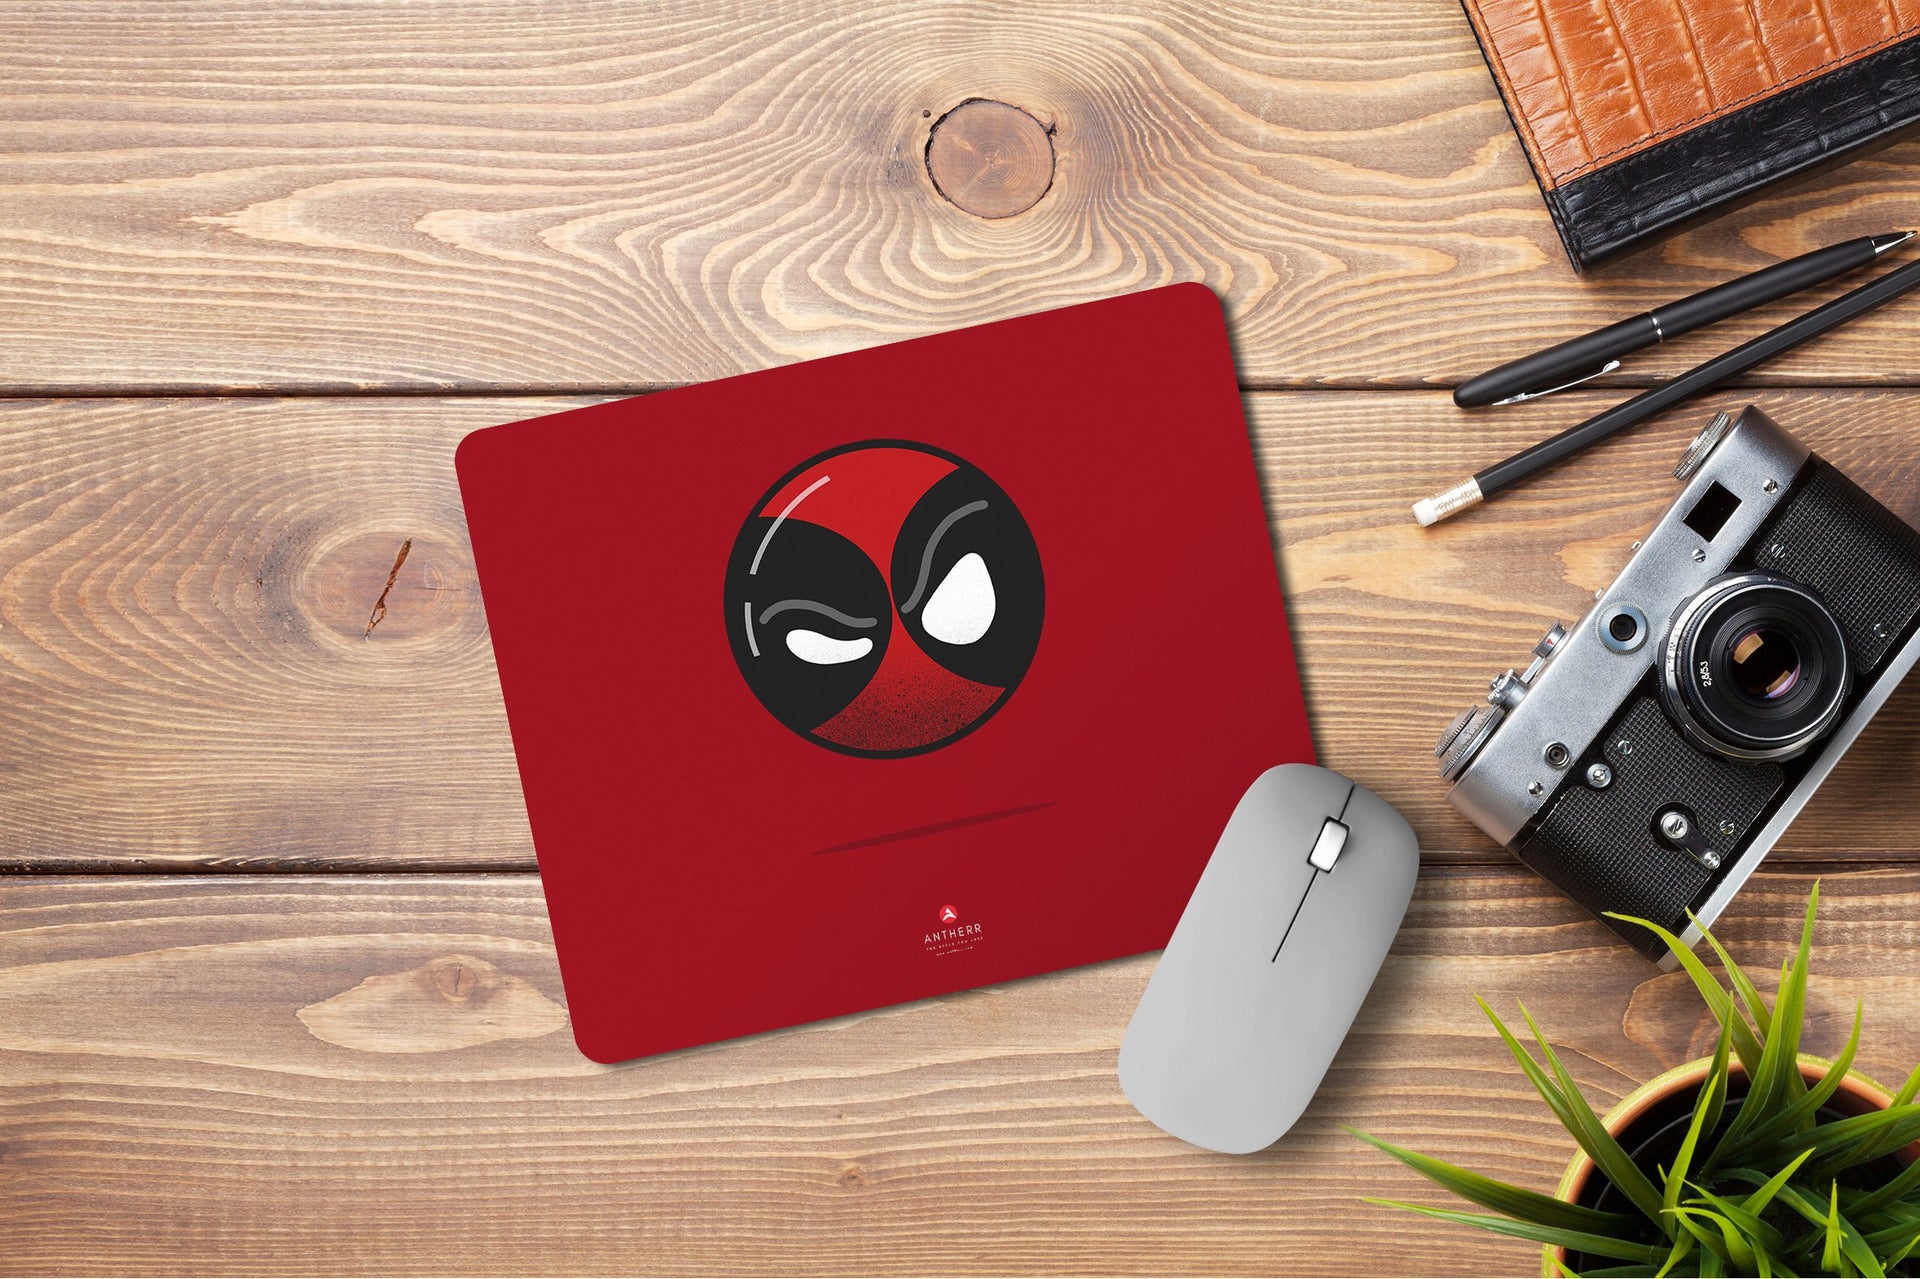 DEADPOOL" - Anti Skid Mouse Pad By Antherr